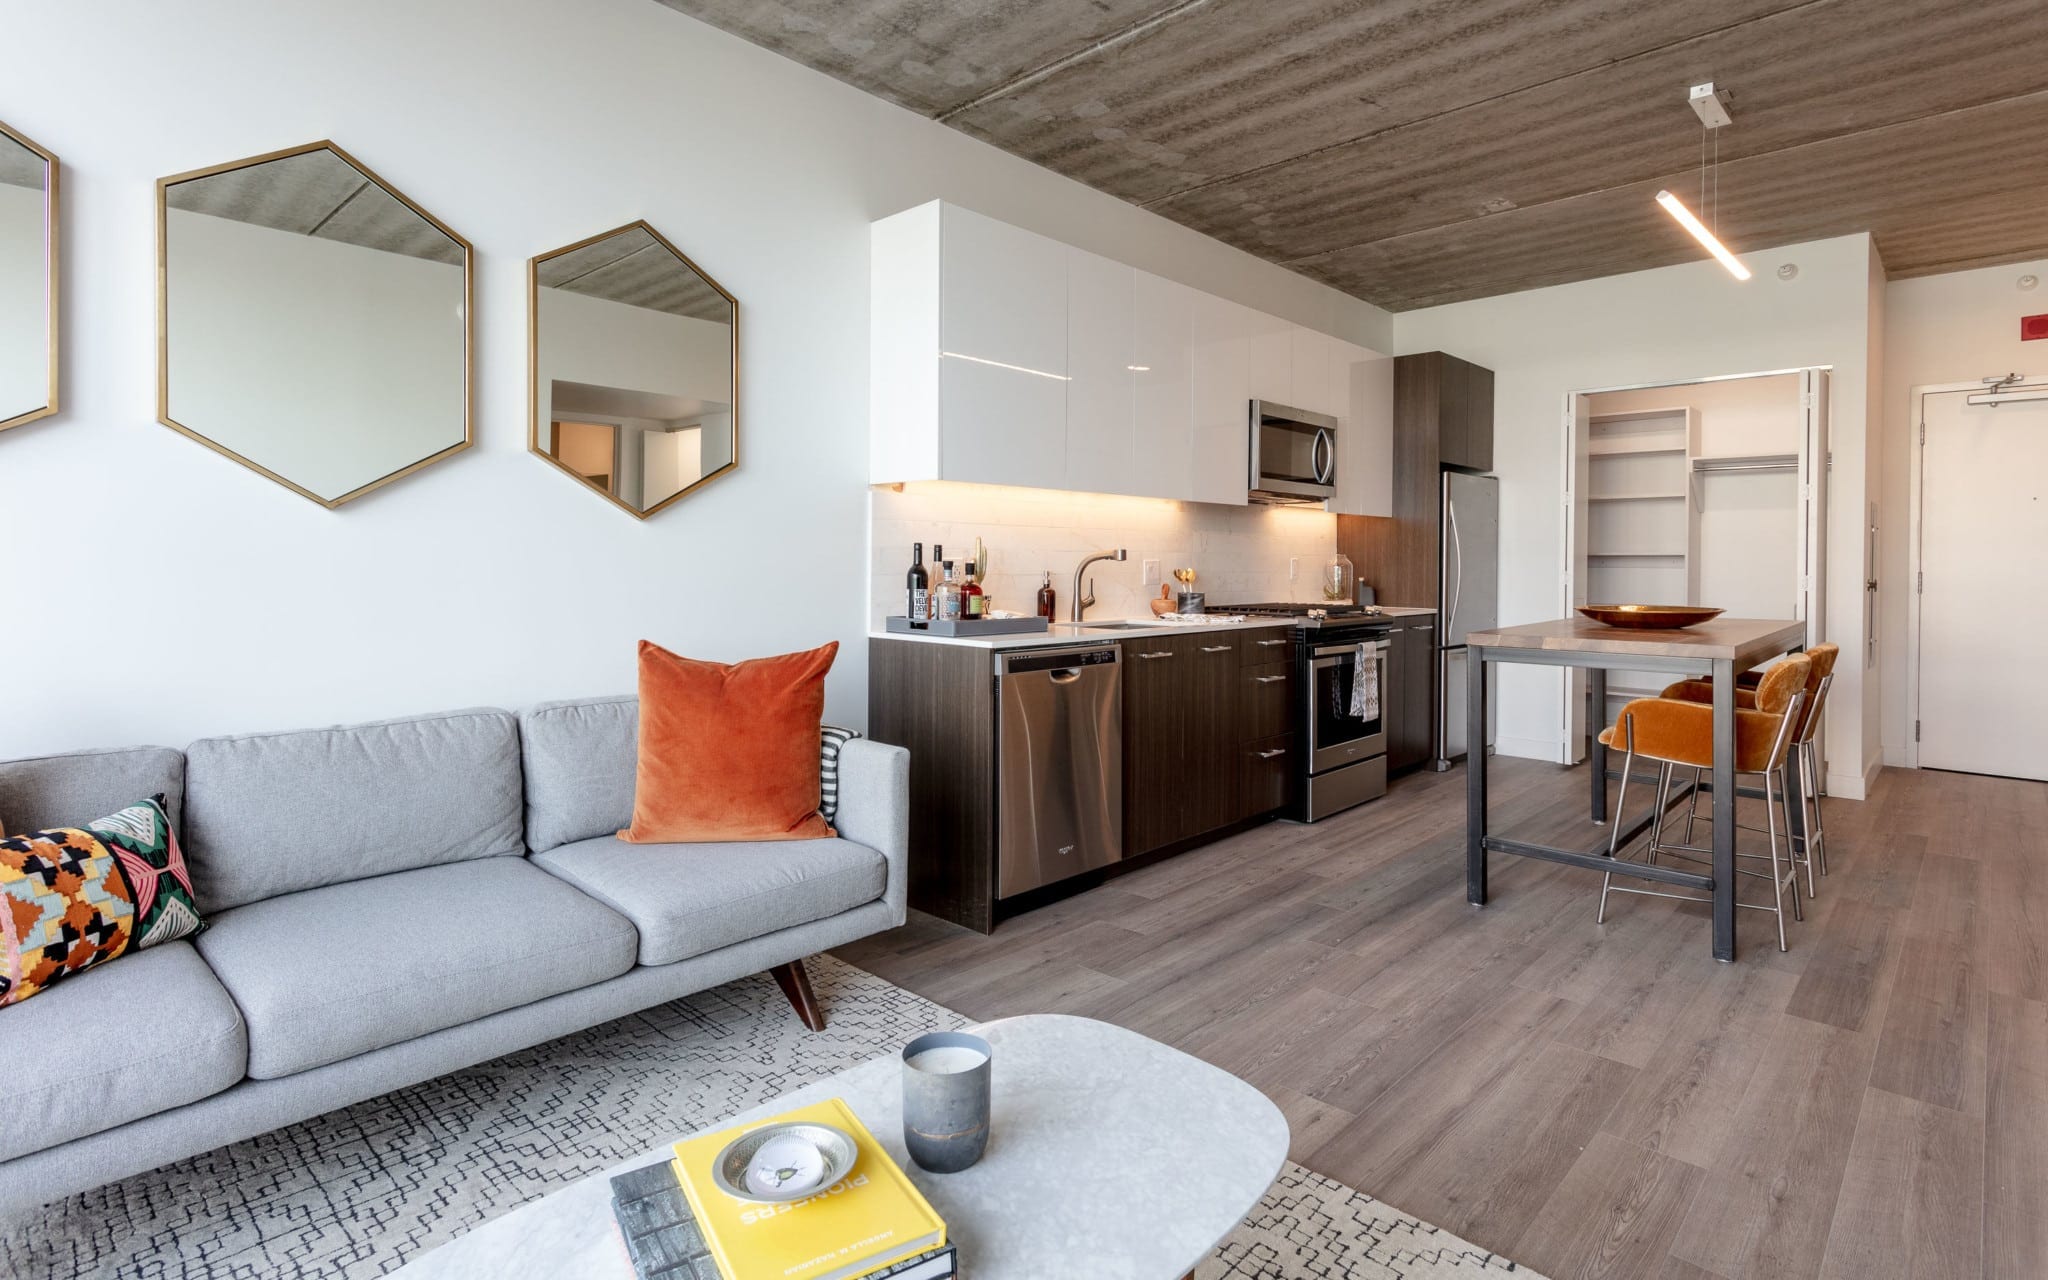 See what our brokers like best about Wicker Park Connection's boutique apartments.